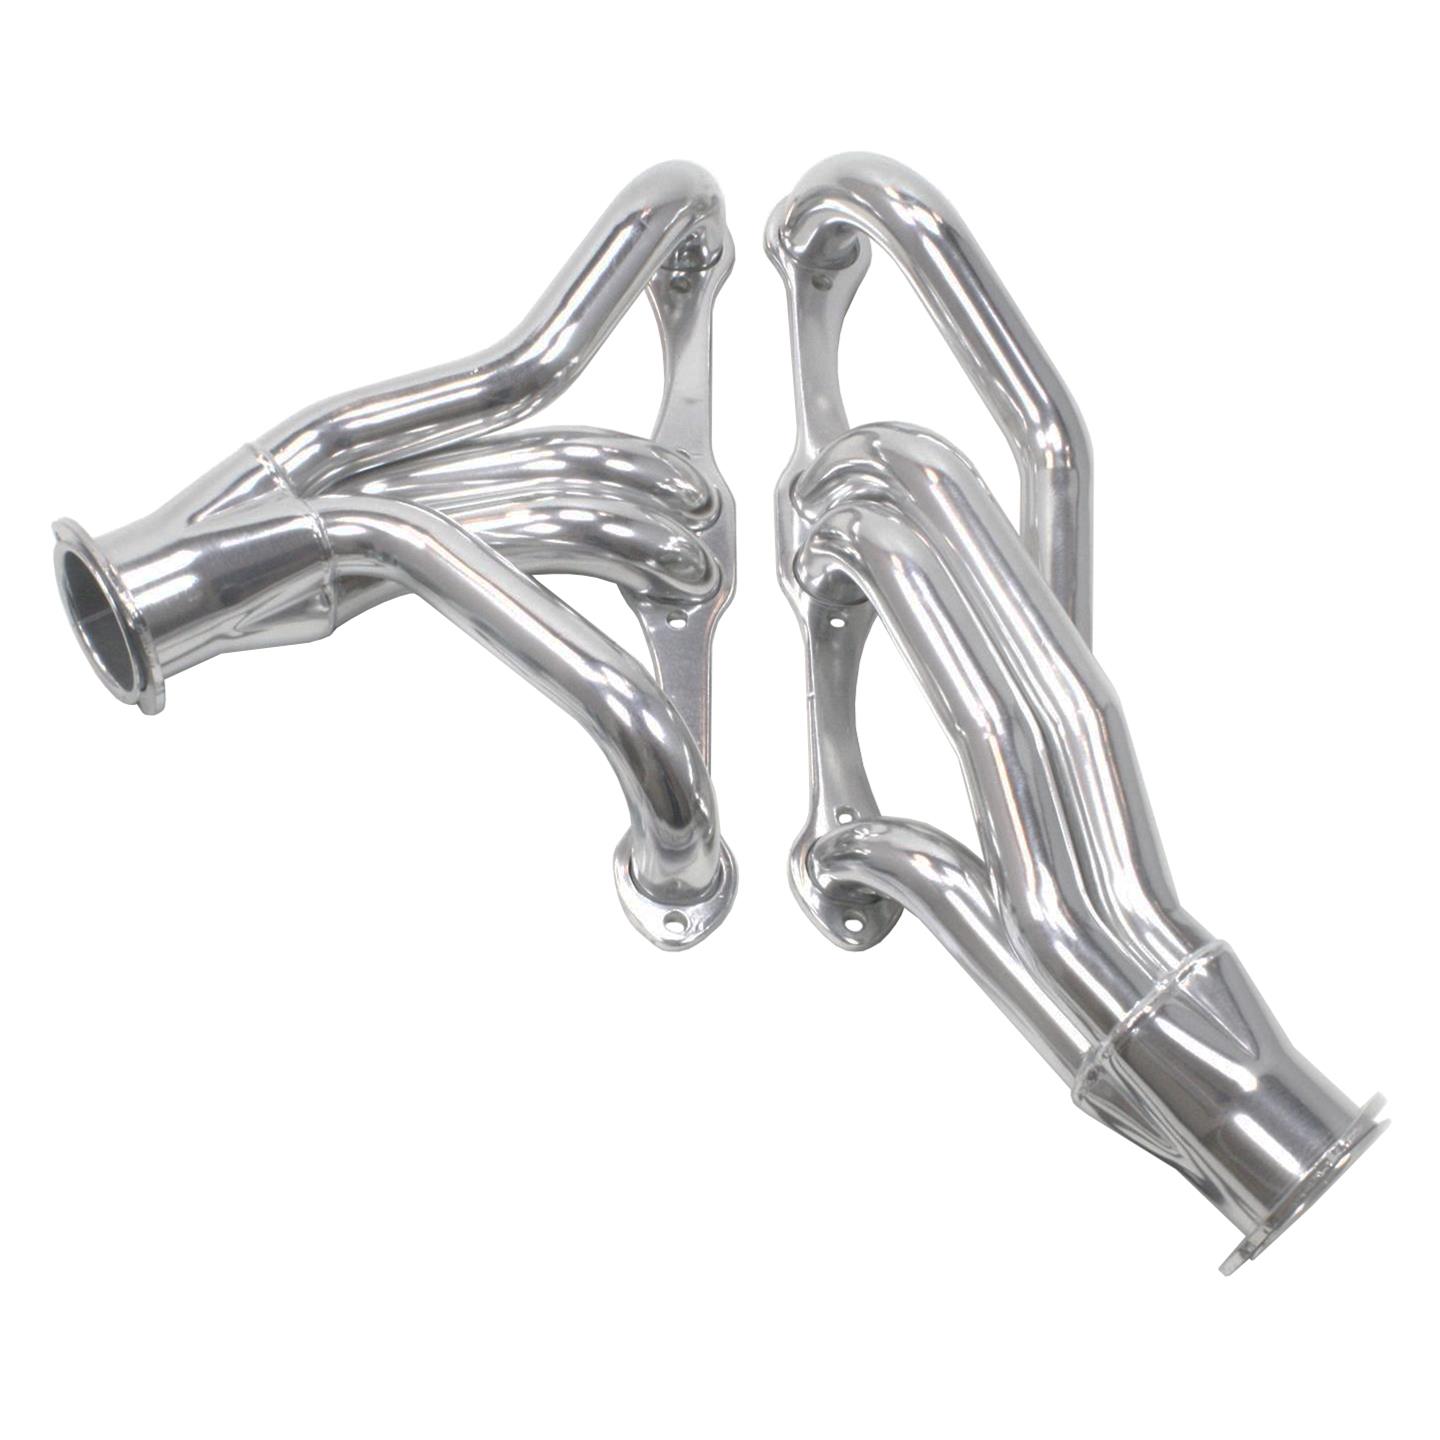 Patriot Exhaust H8056-1 Patriot Clippster Headers | Summit Racing